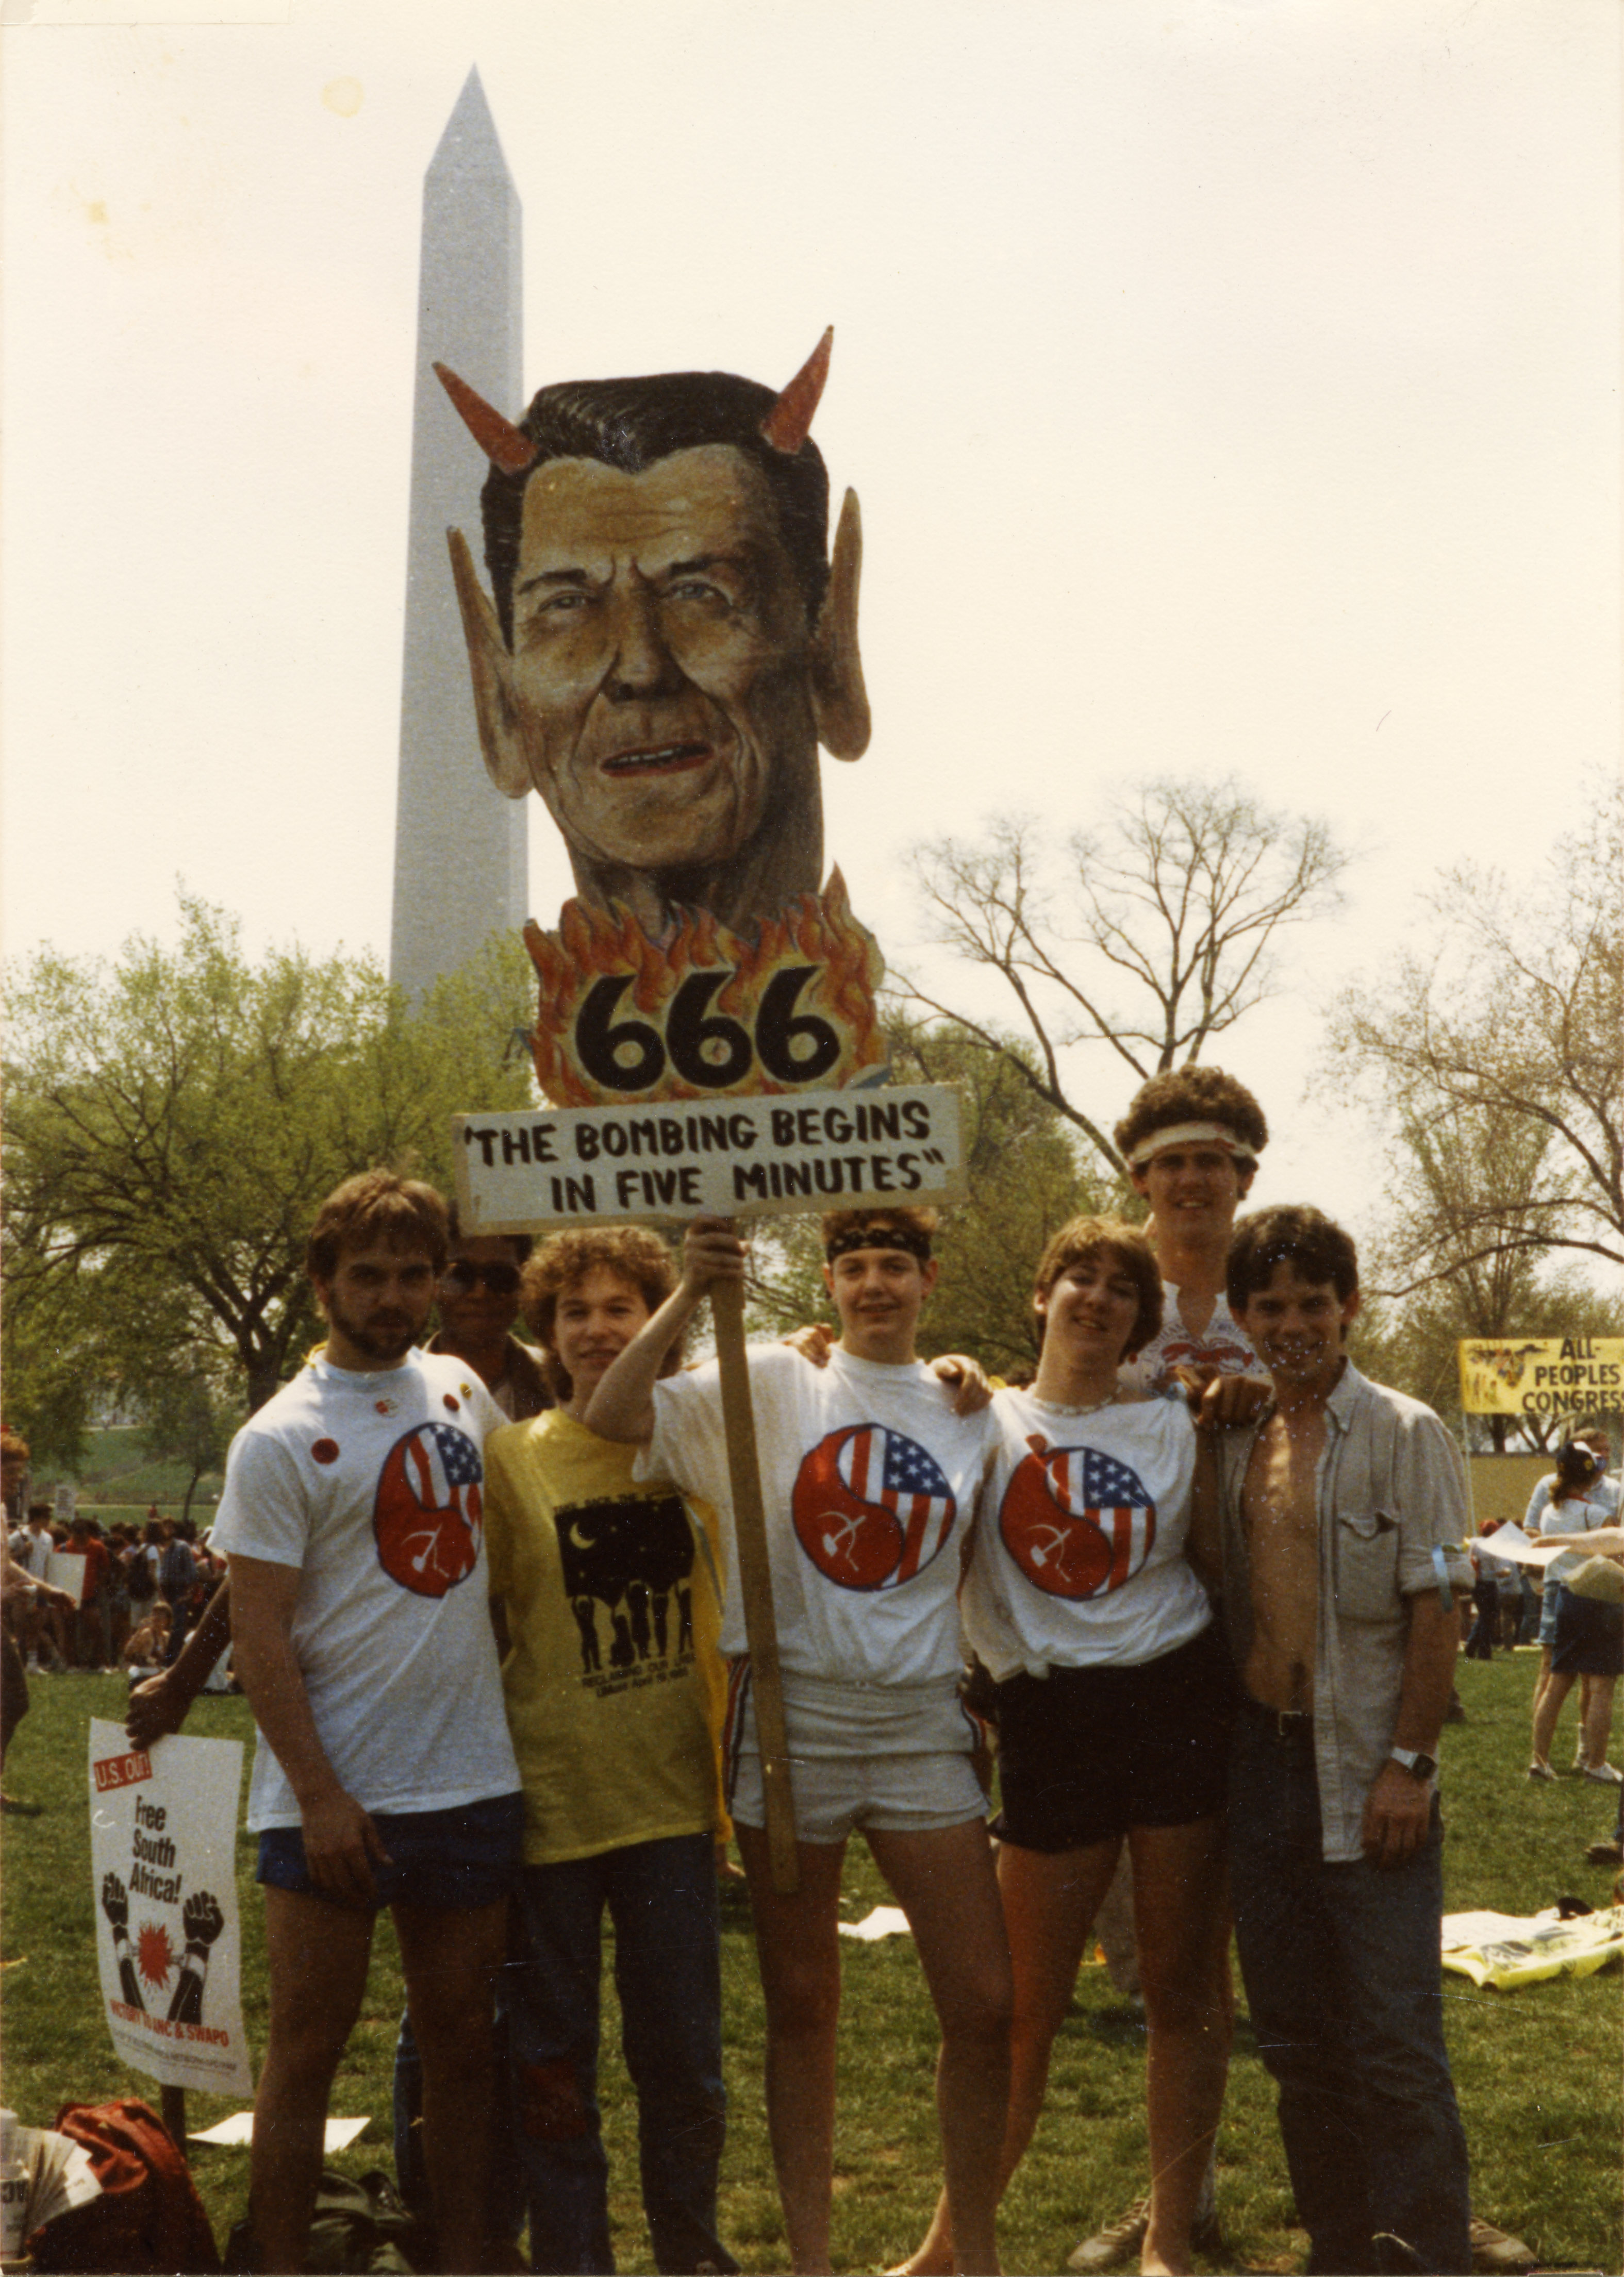 Peacemakers at the Four Days in April protest, Washinton, D.C., April 1985